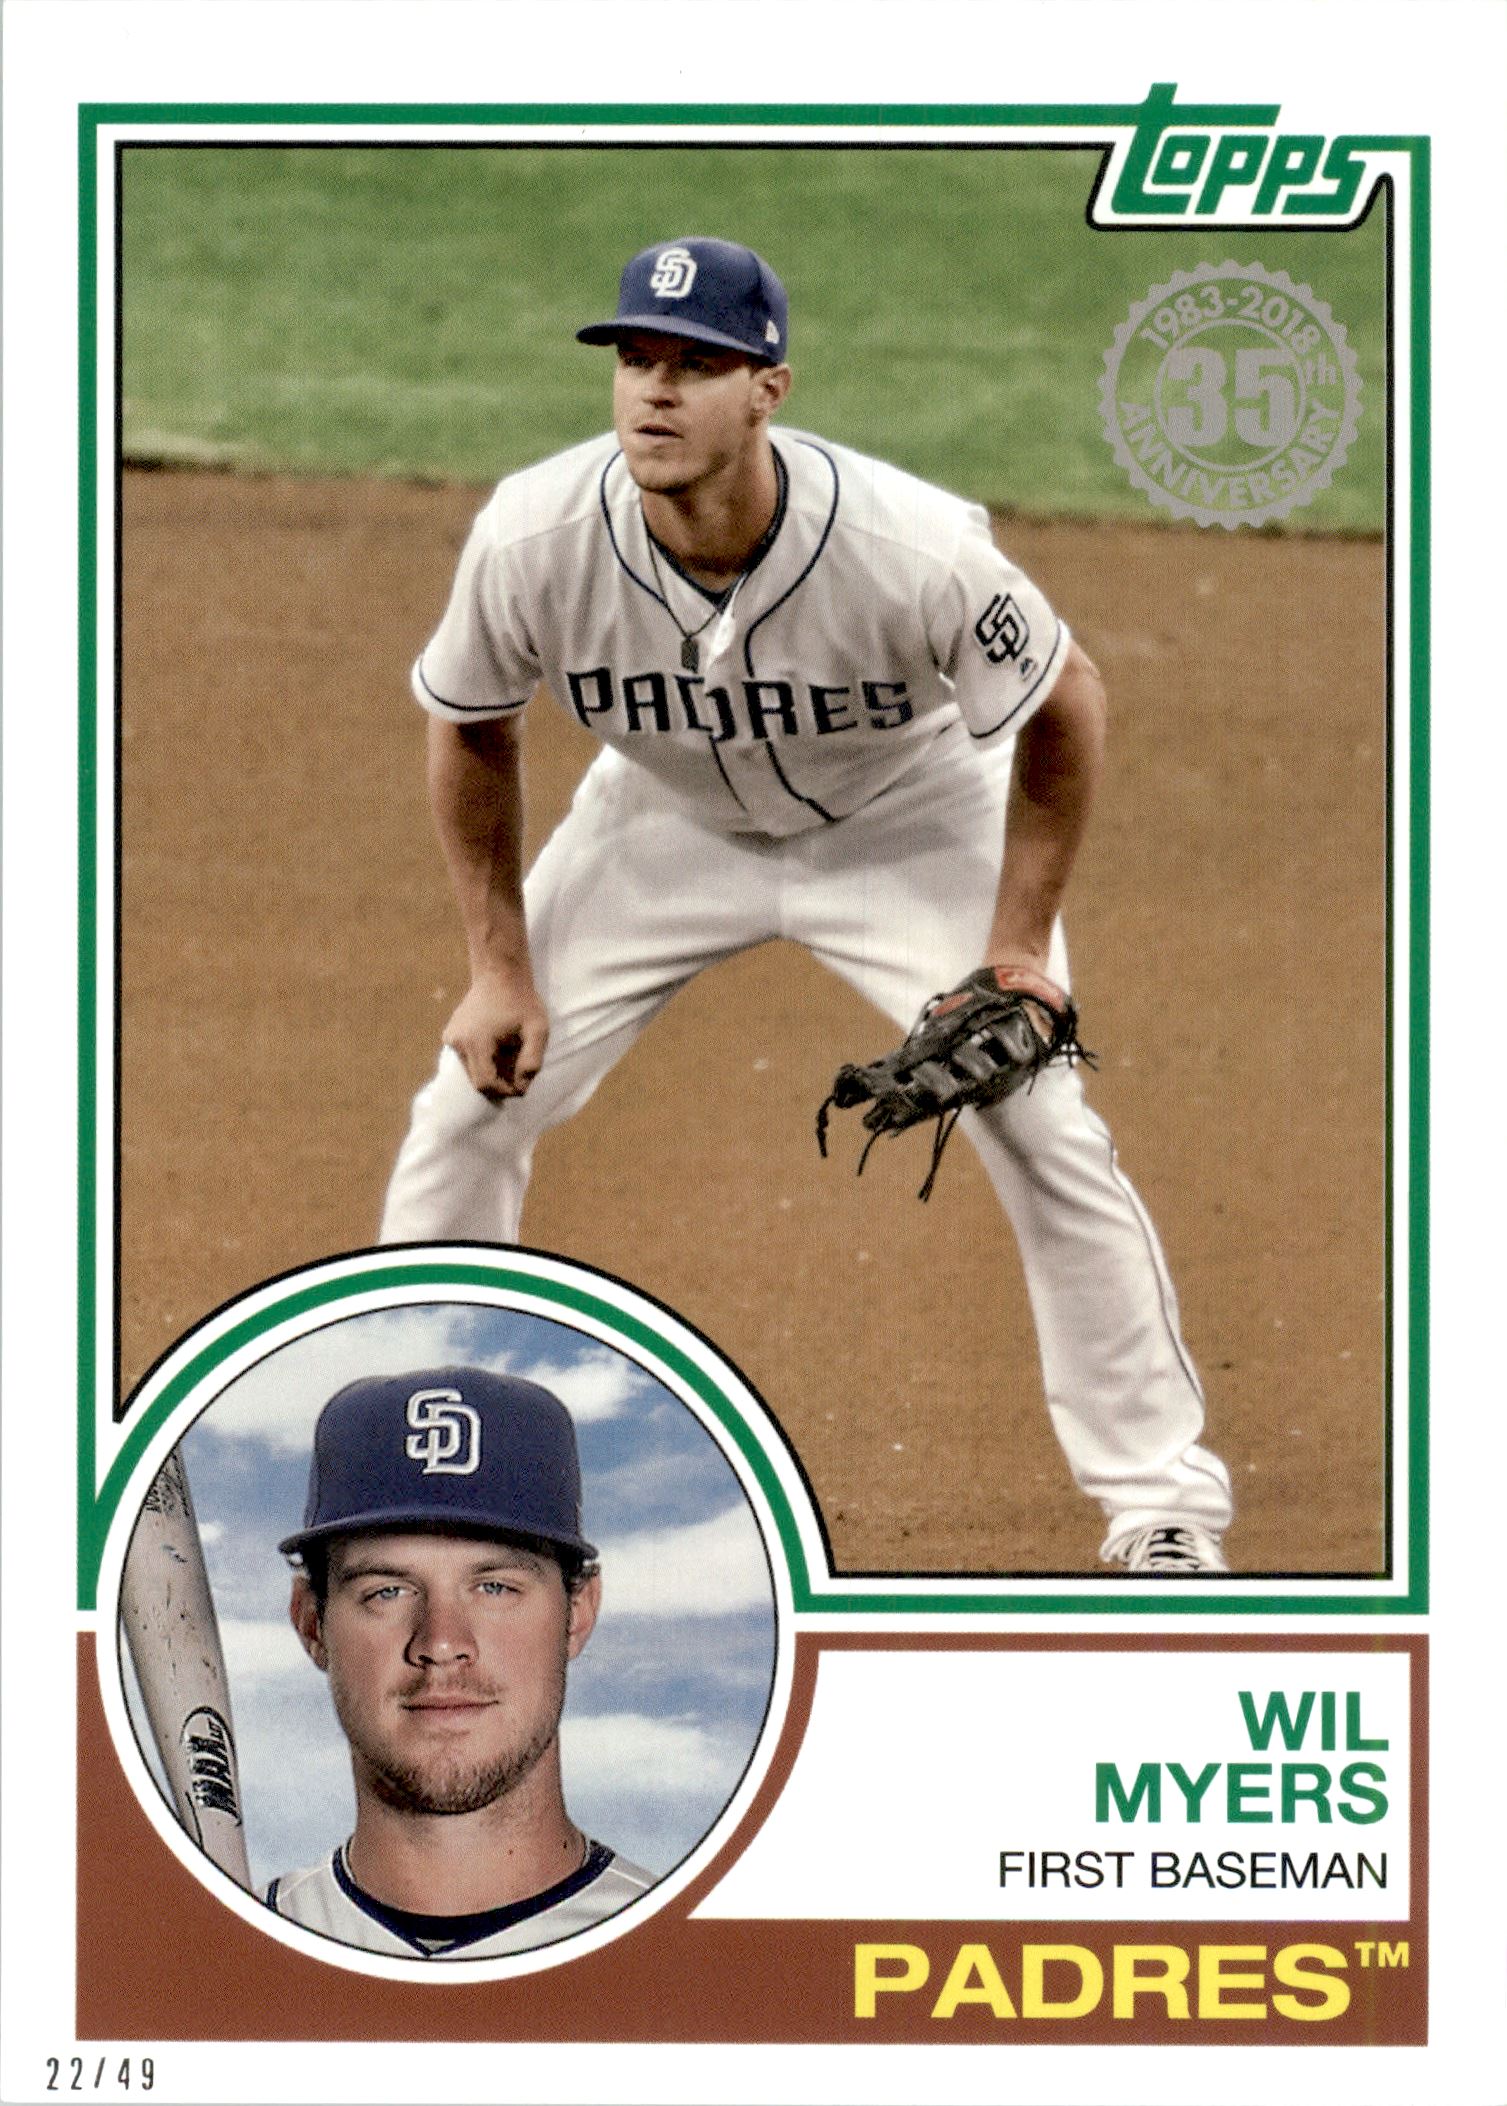 2018 Topps 5x7 '83 Topps #8394 Wil Myers